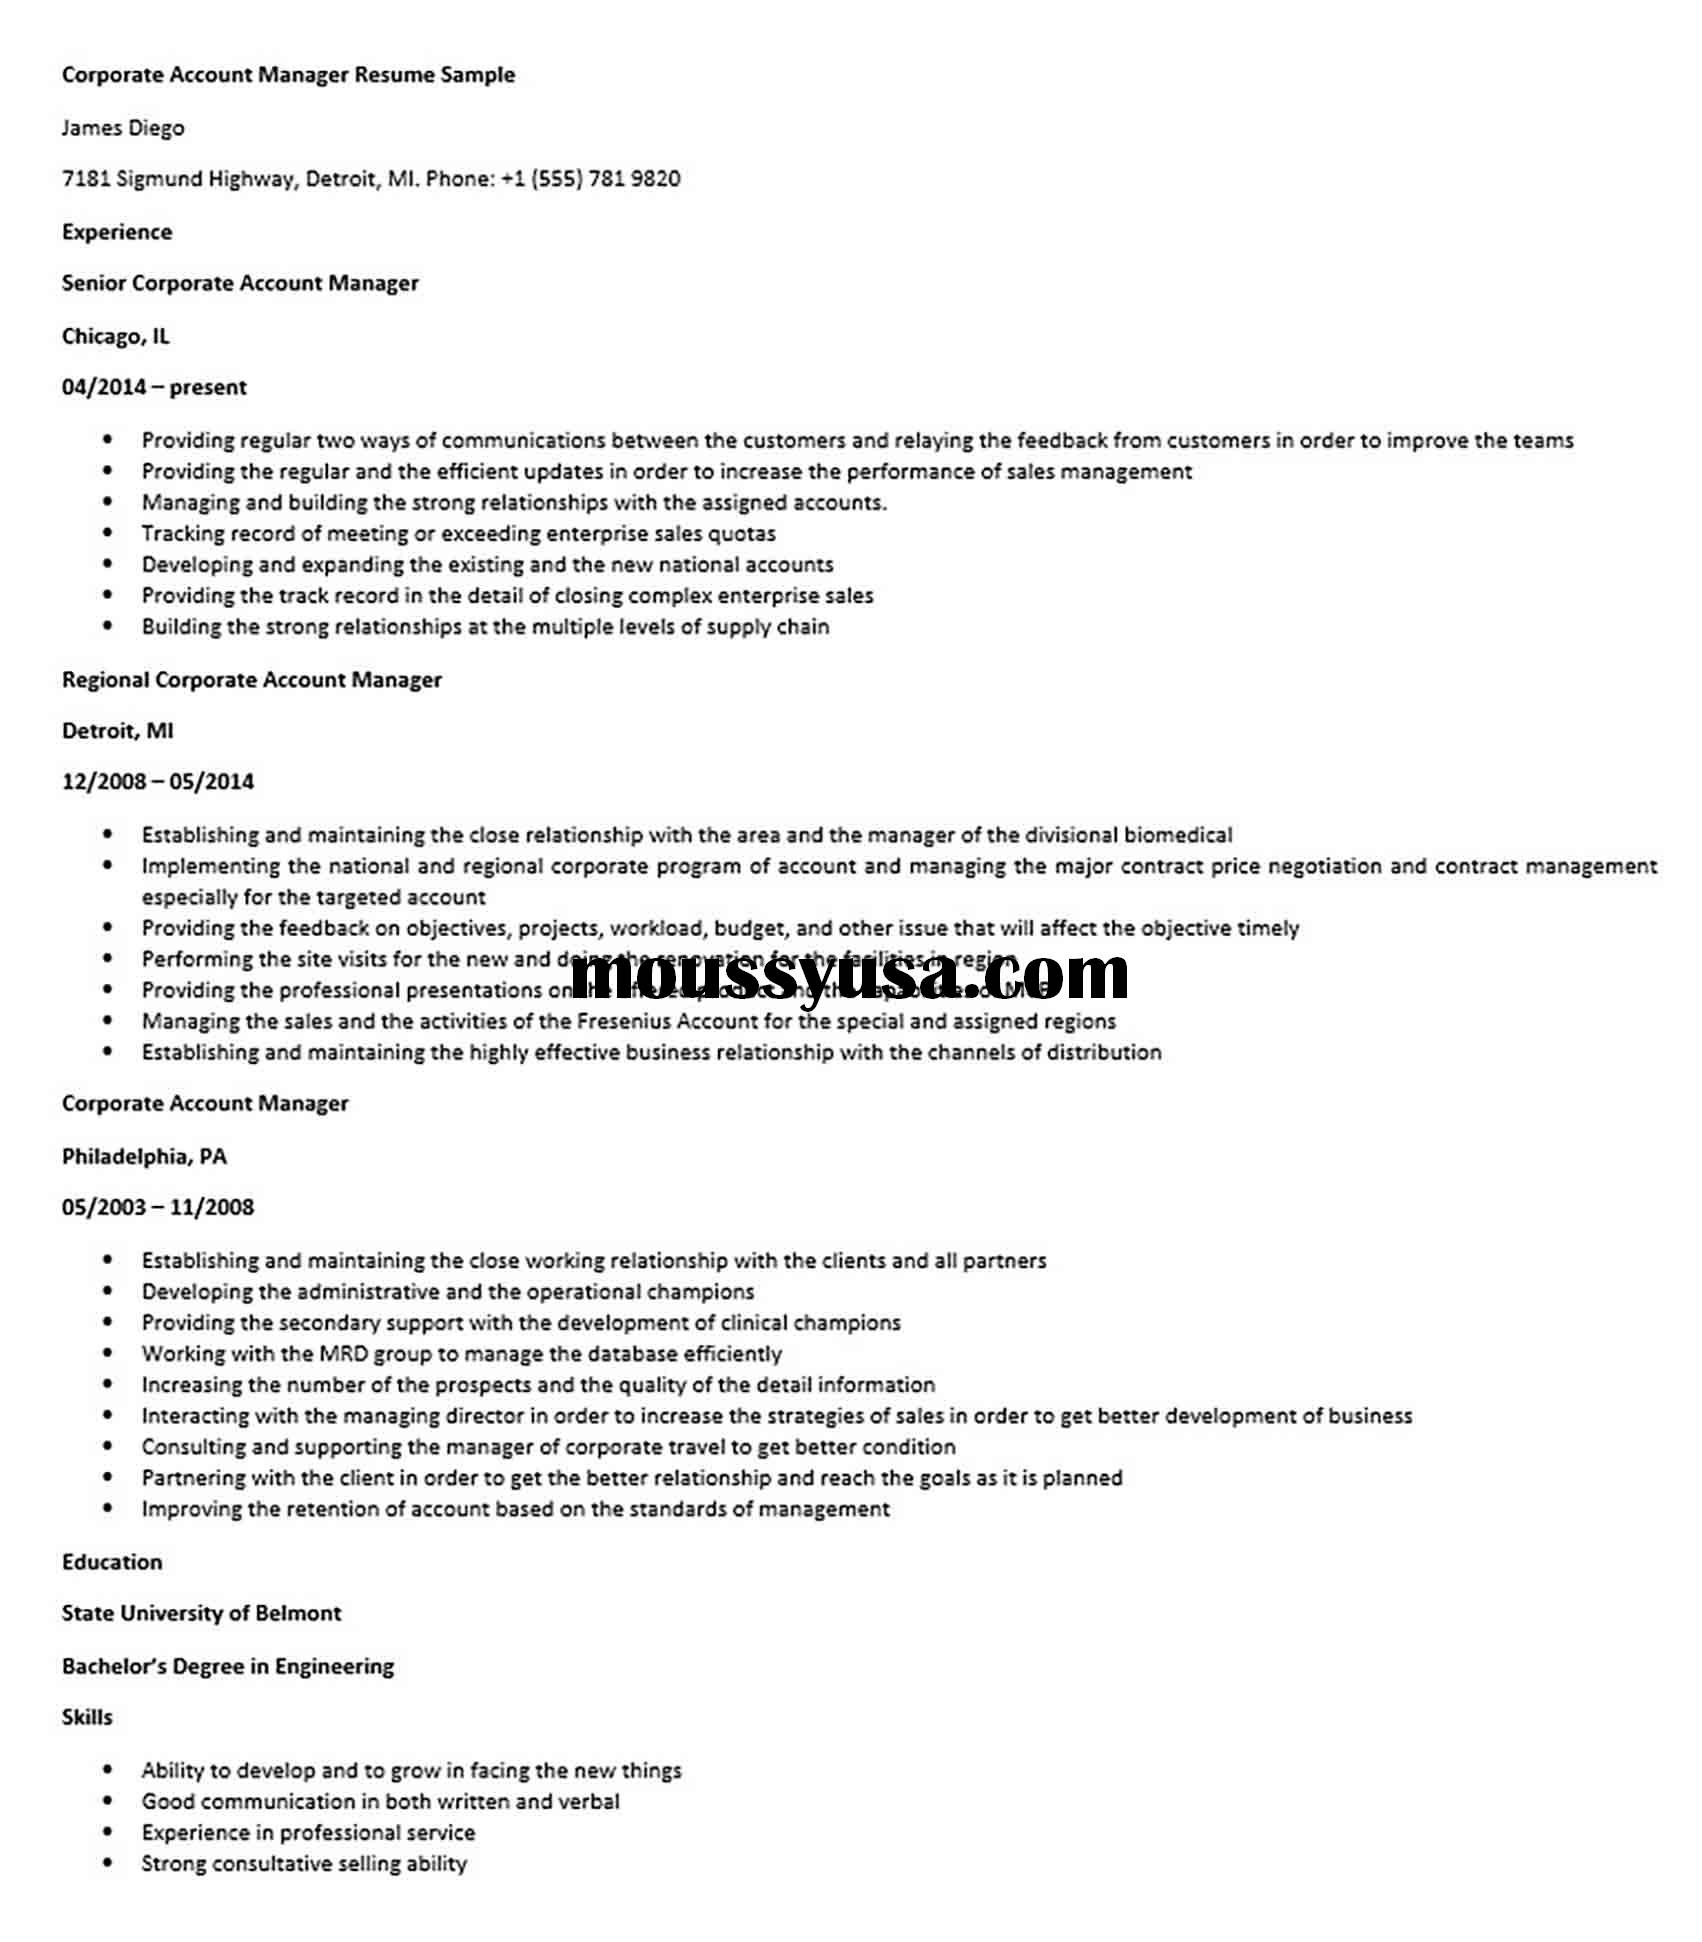 Corporate Account Manager Resume Sample